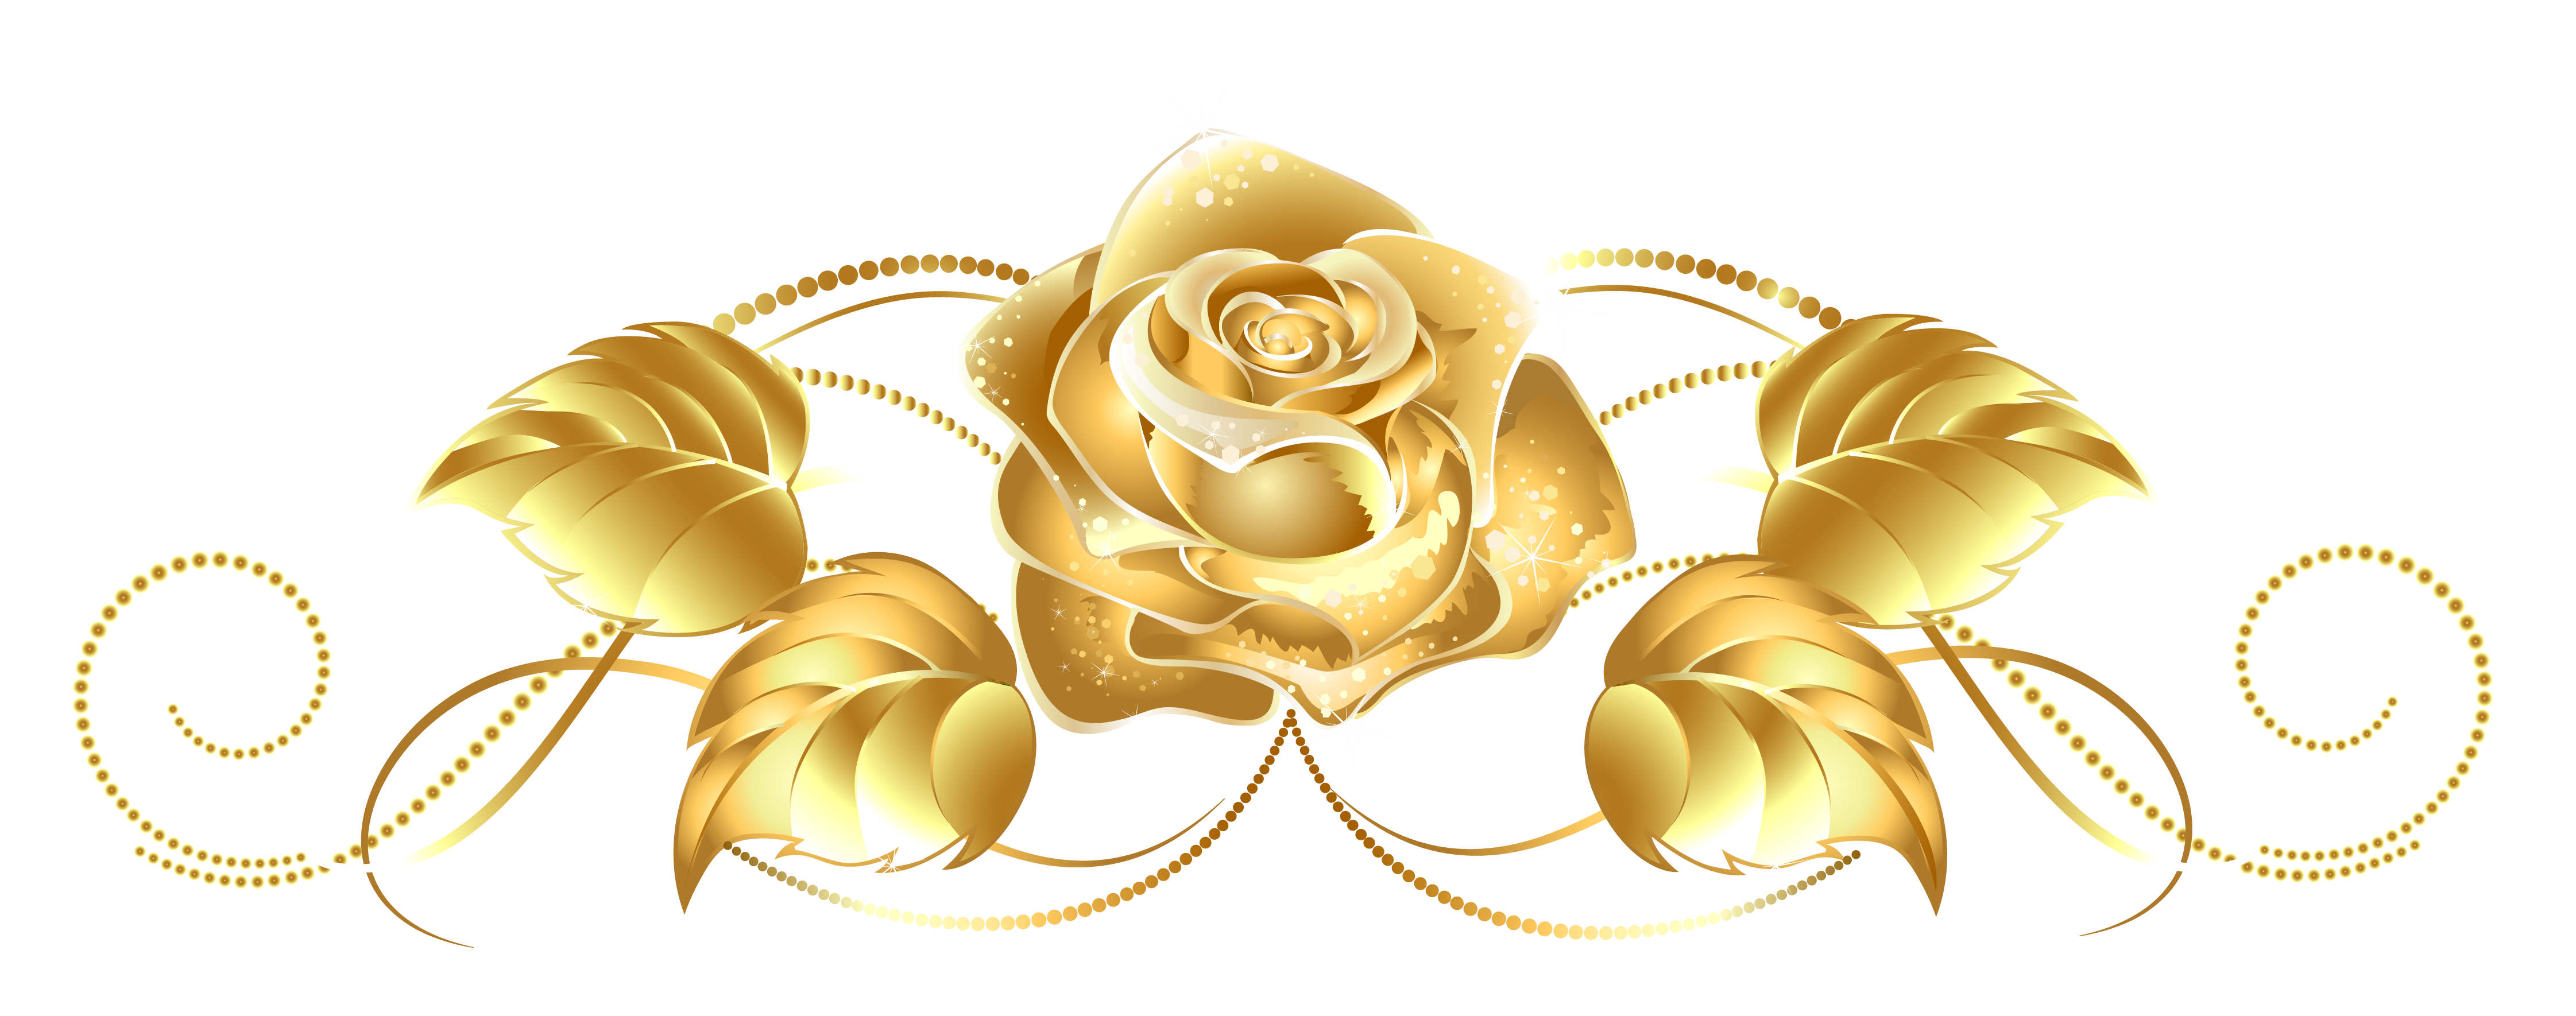 Download Gold PNG Image